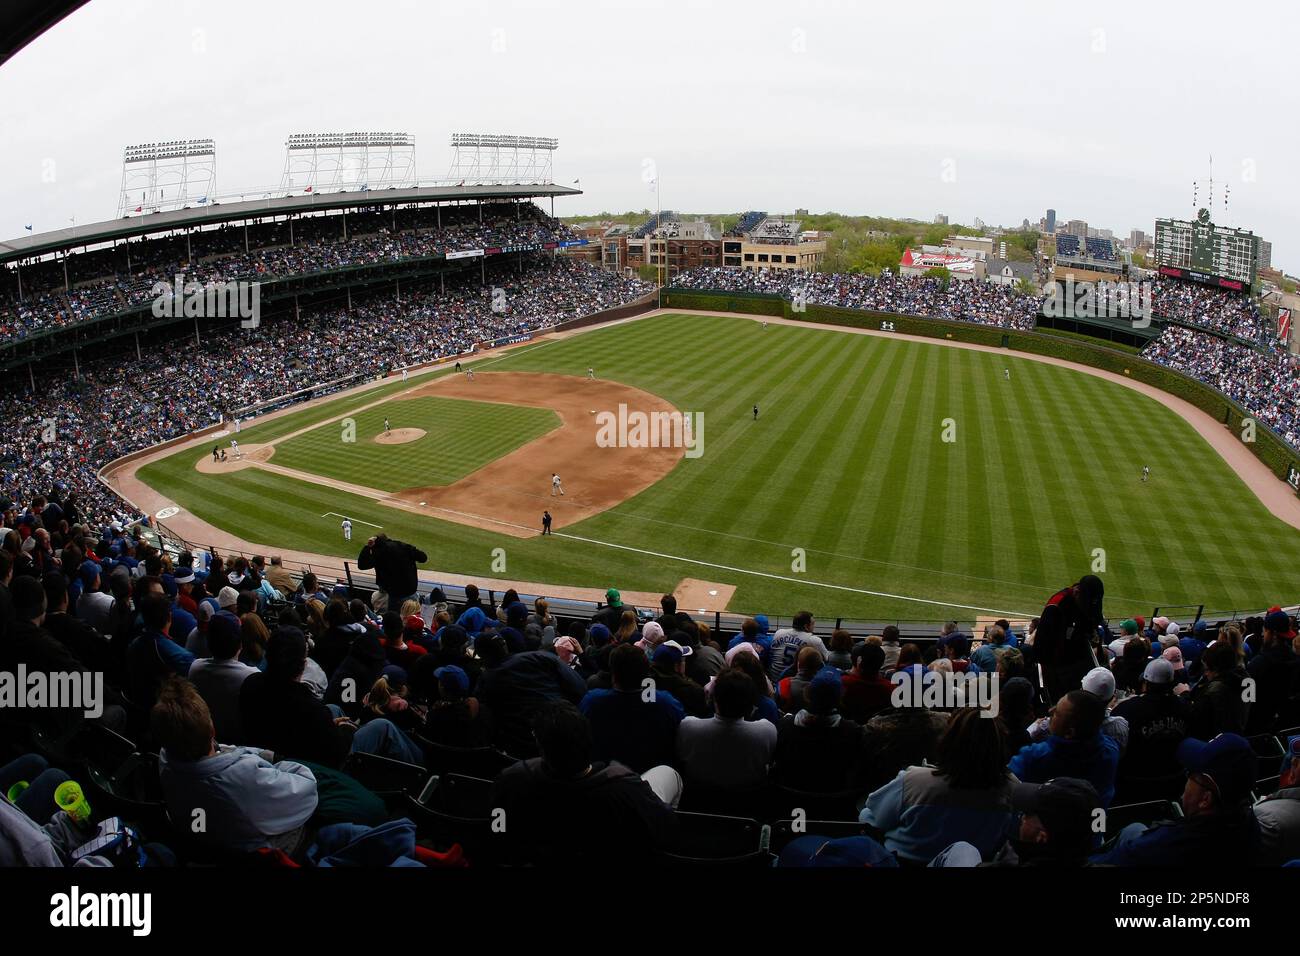 CHICAGO, IL - MAY 12: A general view inside of Wrigley Field of